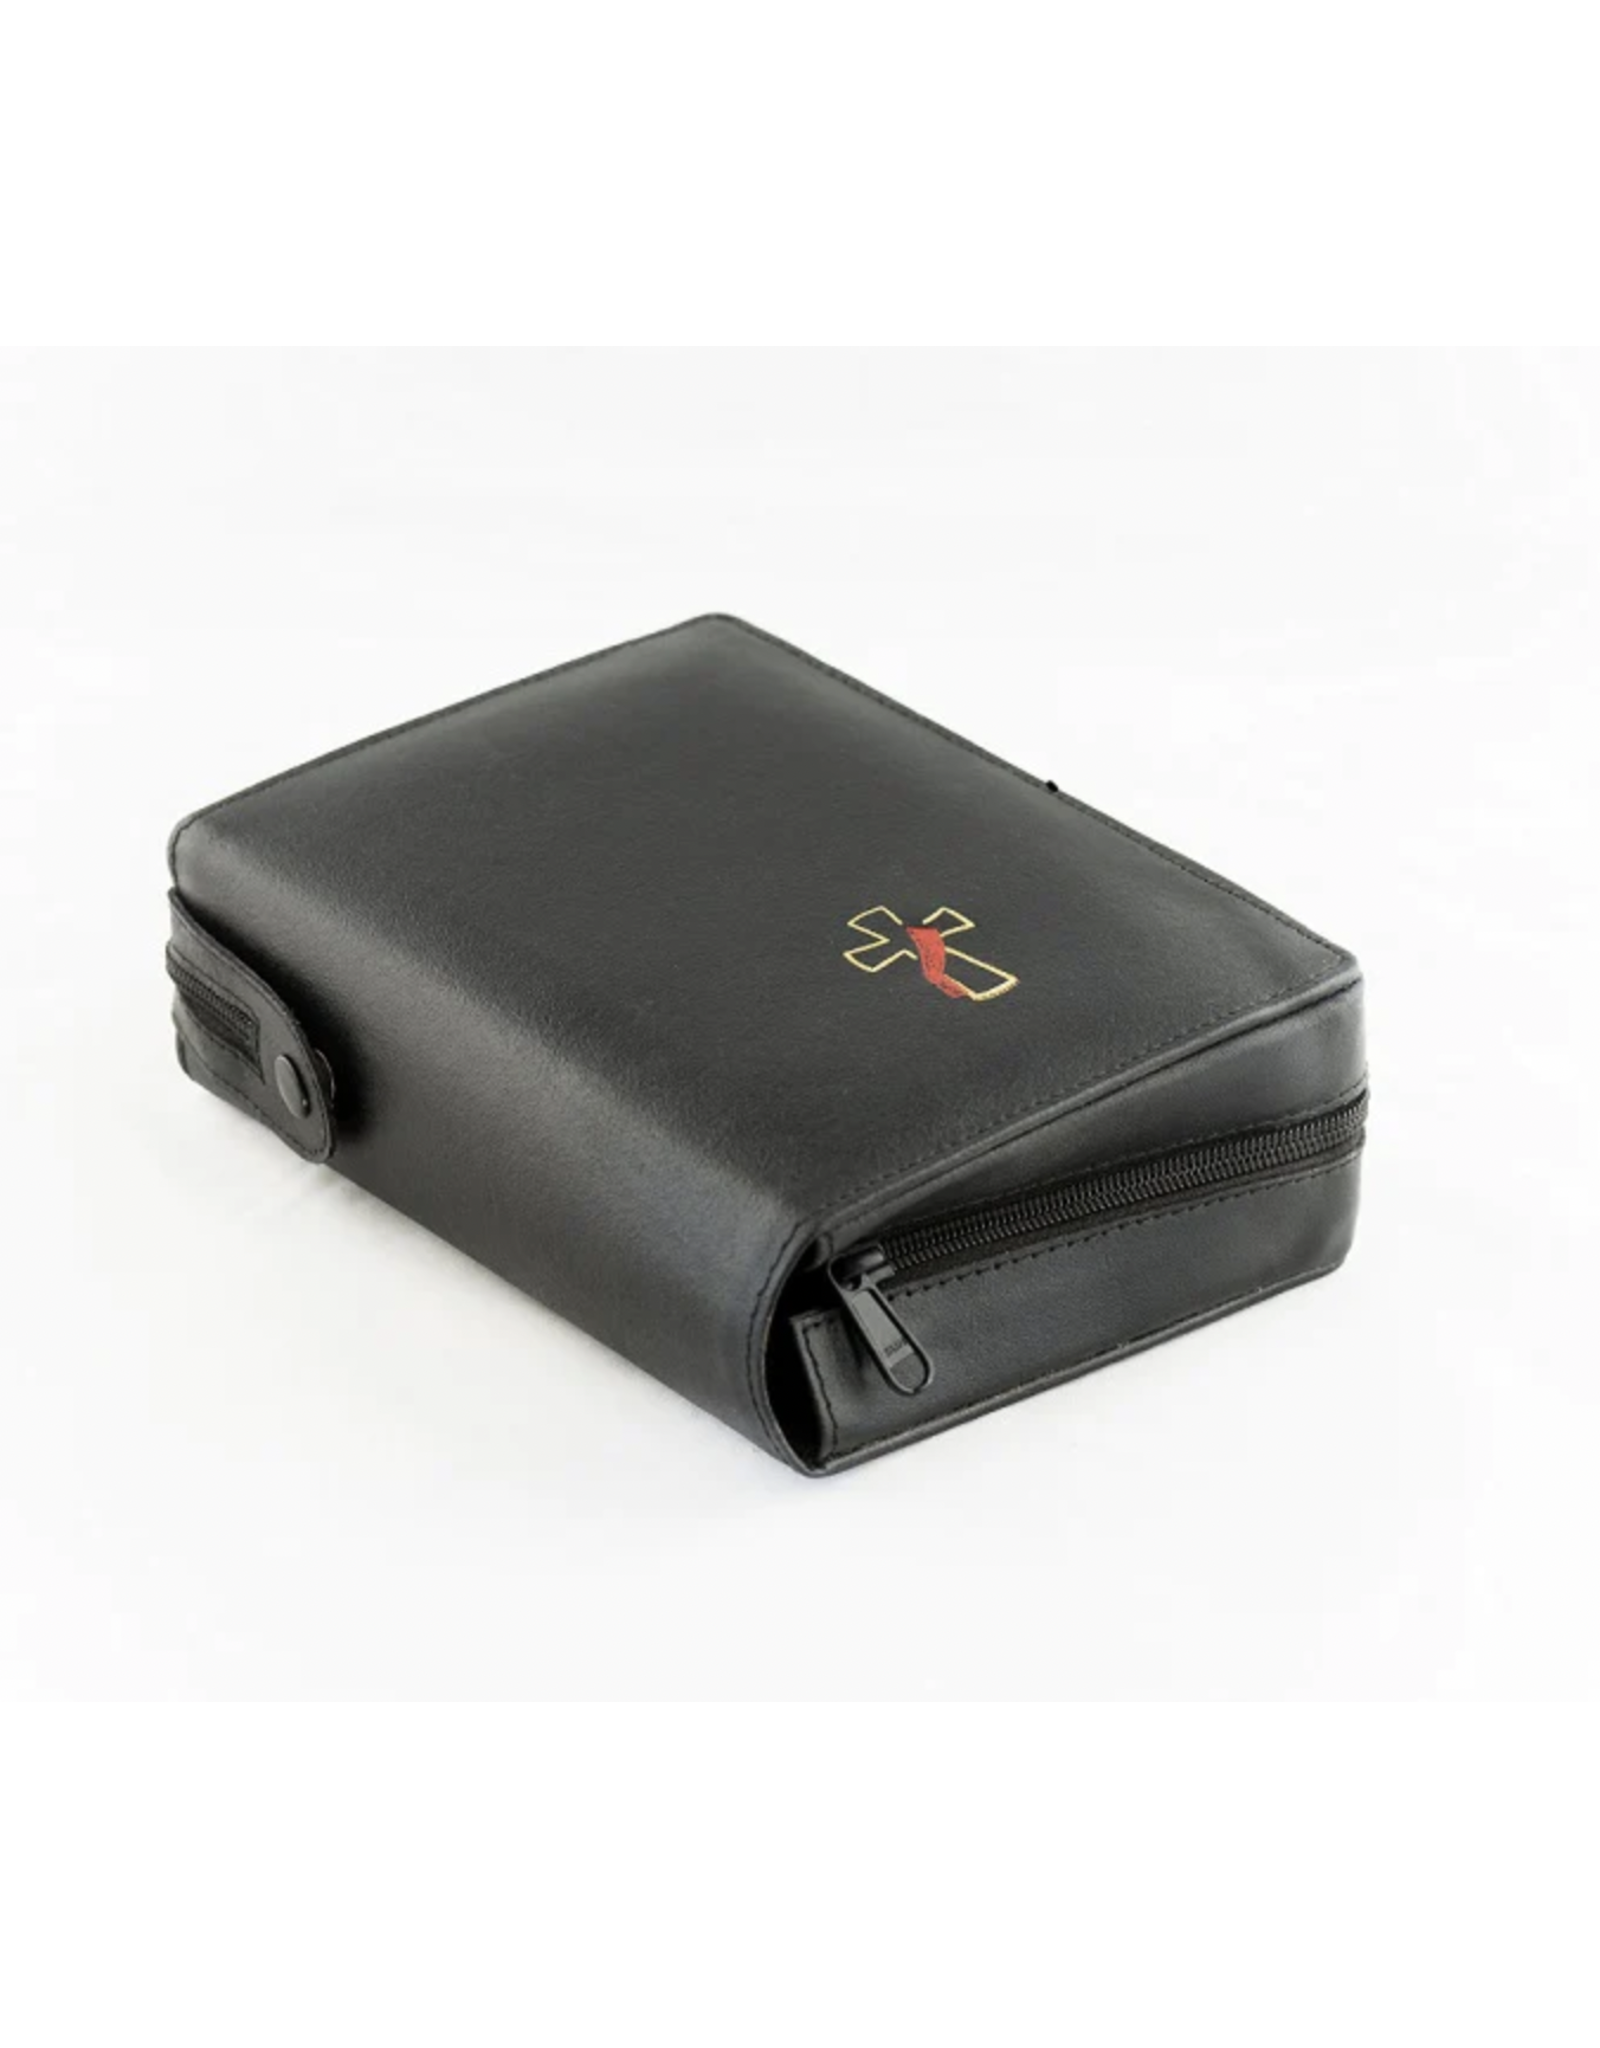 MDS Cover - Black with Deacon Cross - Genuine Leather